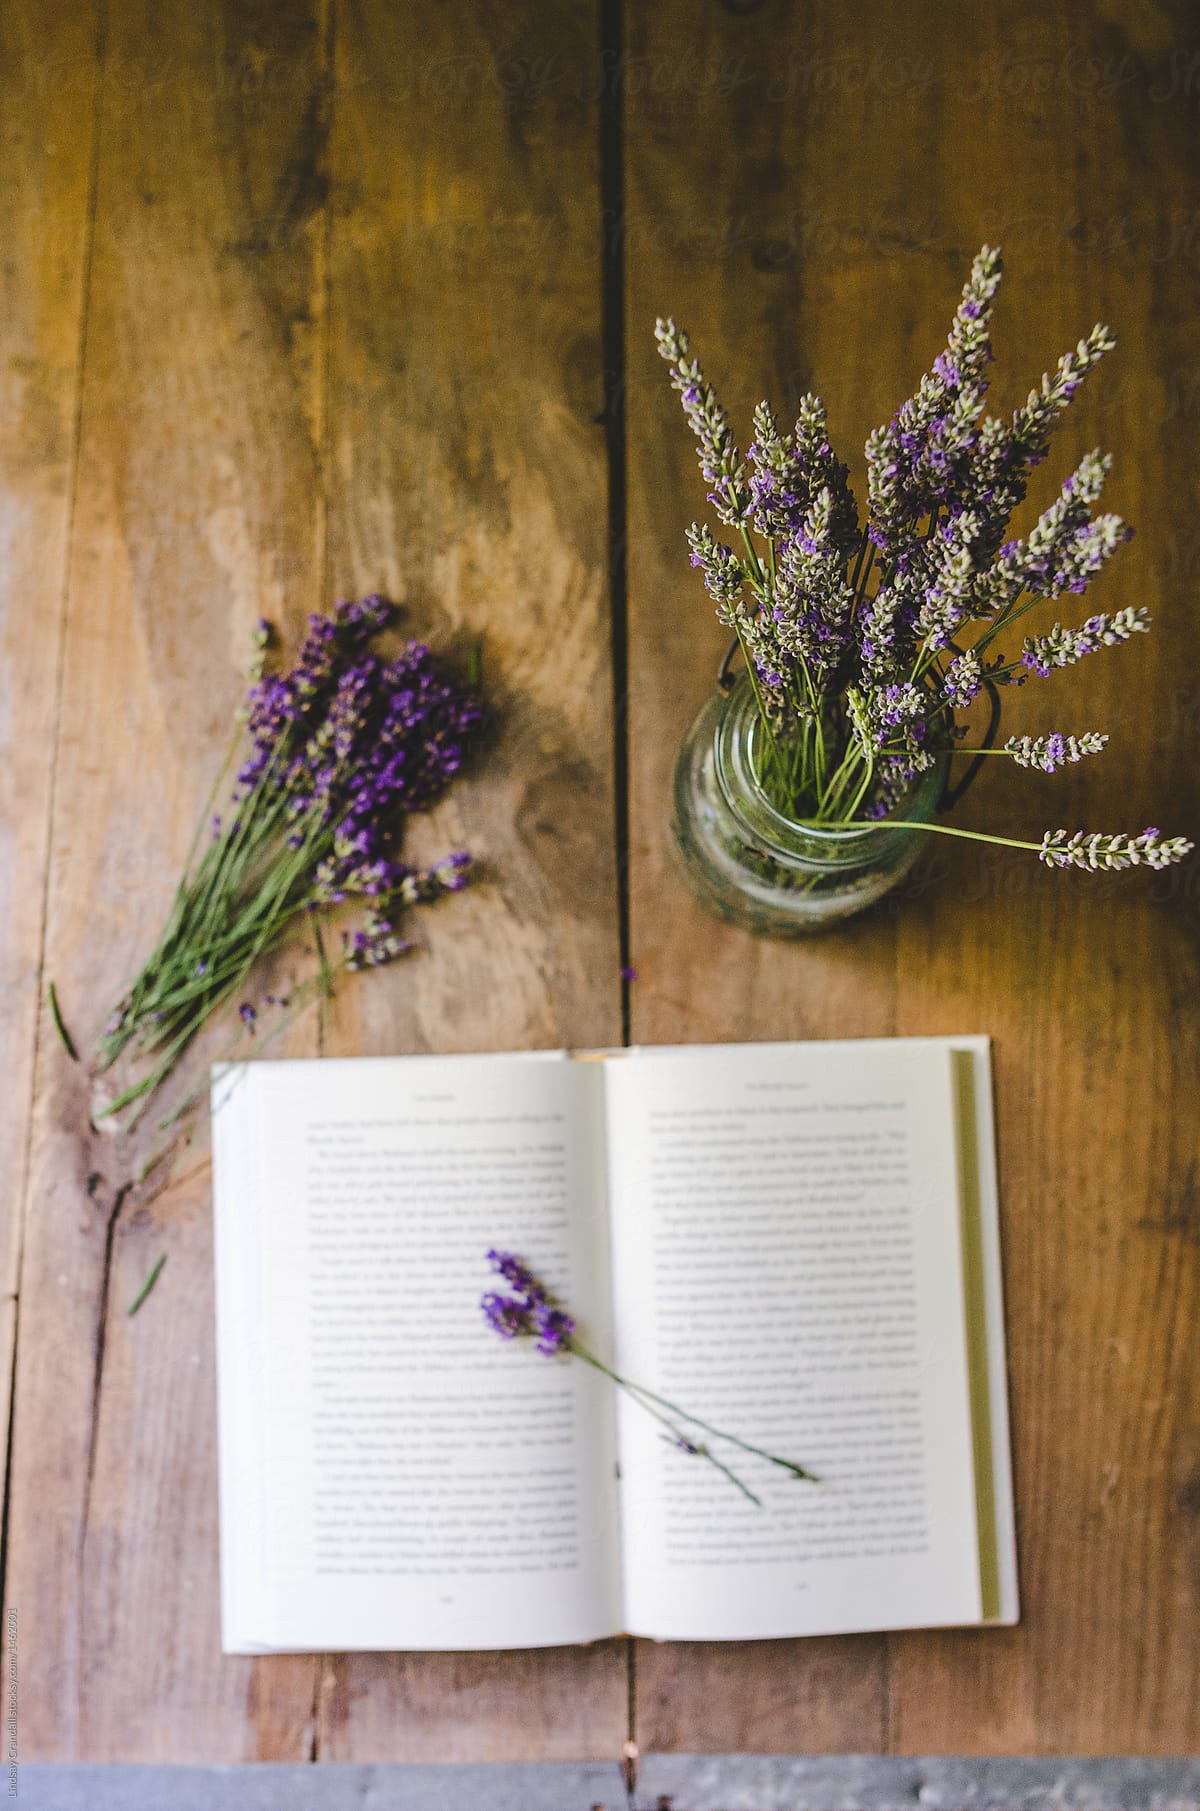 Still life with open book and fresh lavender